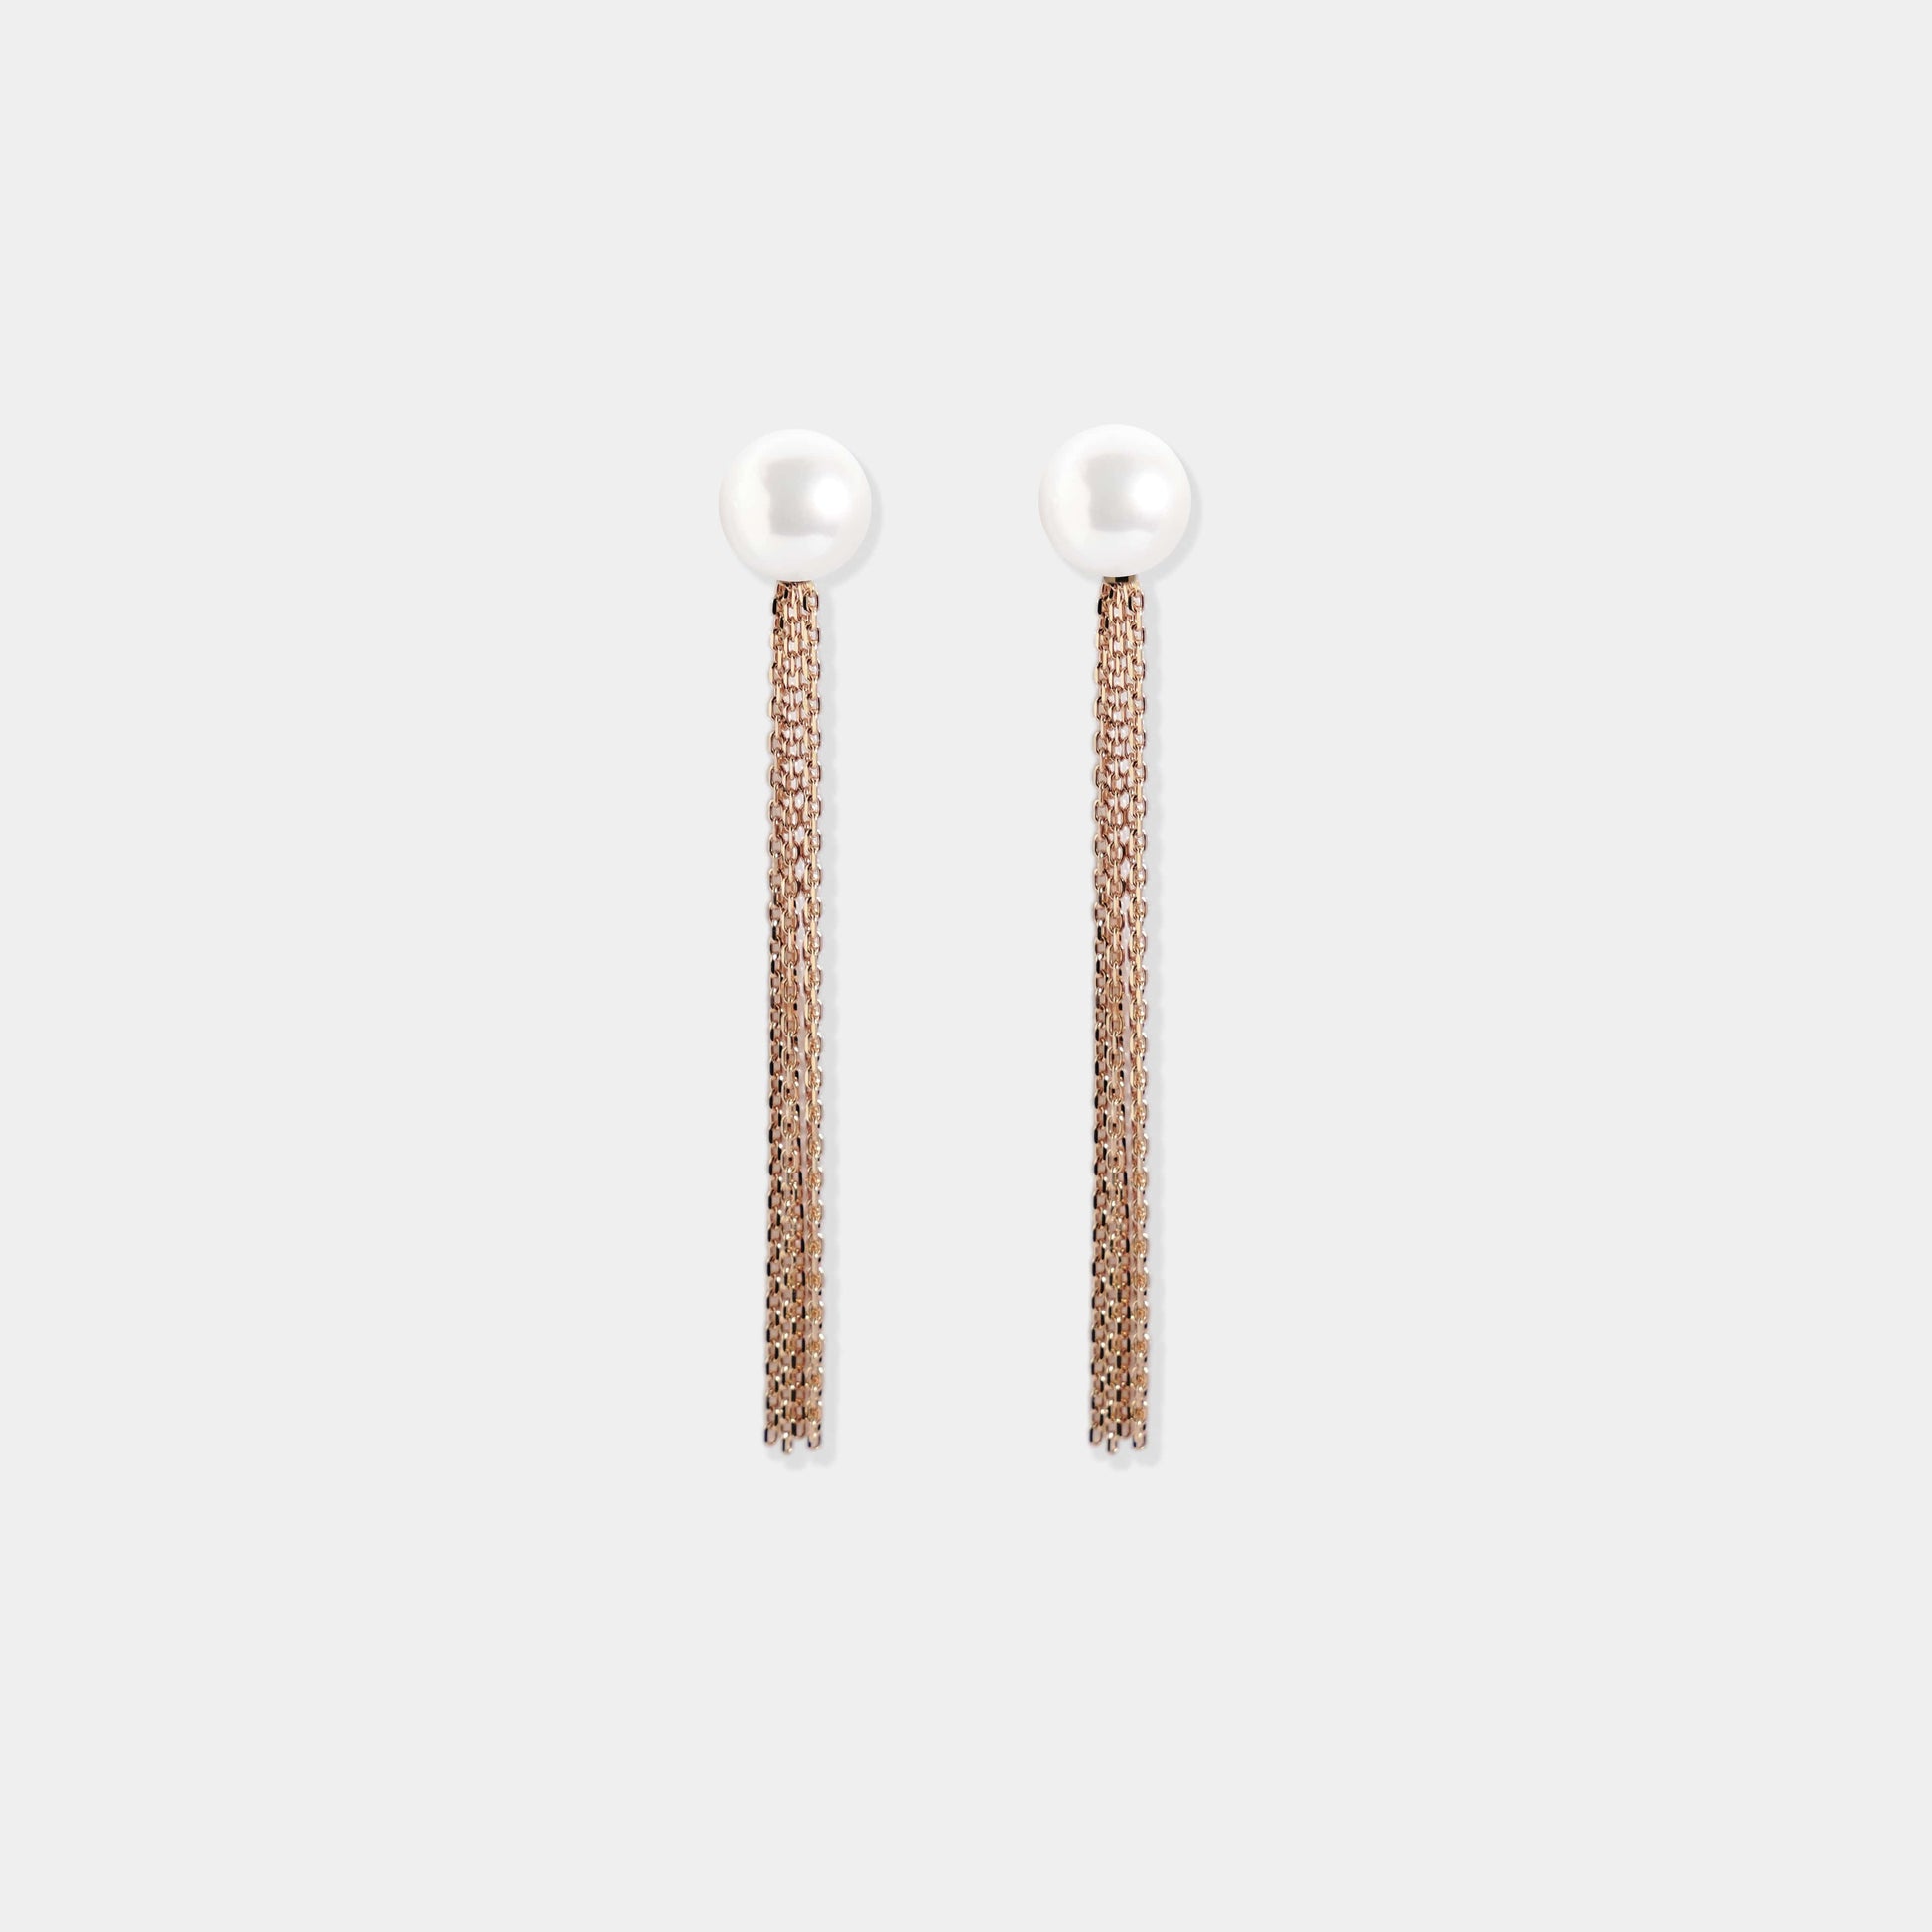 Luxurious white pearl earrings with gold accents, set on a pristine white background. A must-have for any fashionista.